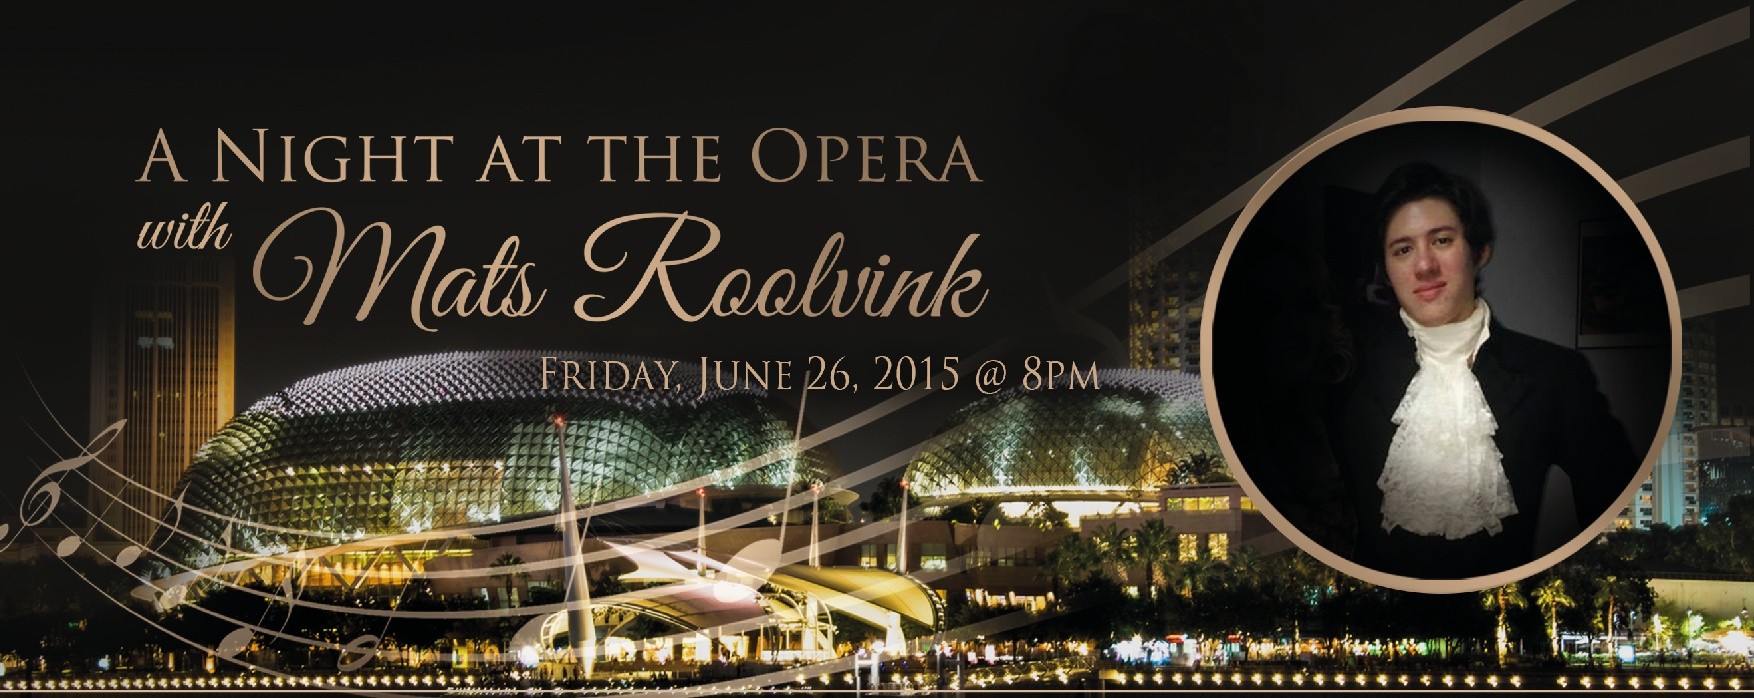 Night at the Opera with Mats Roolvink